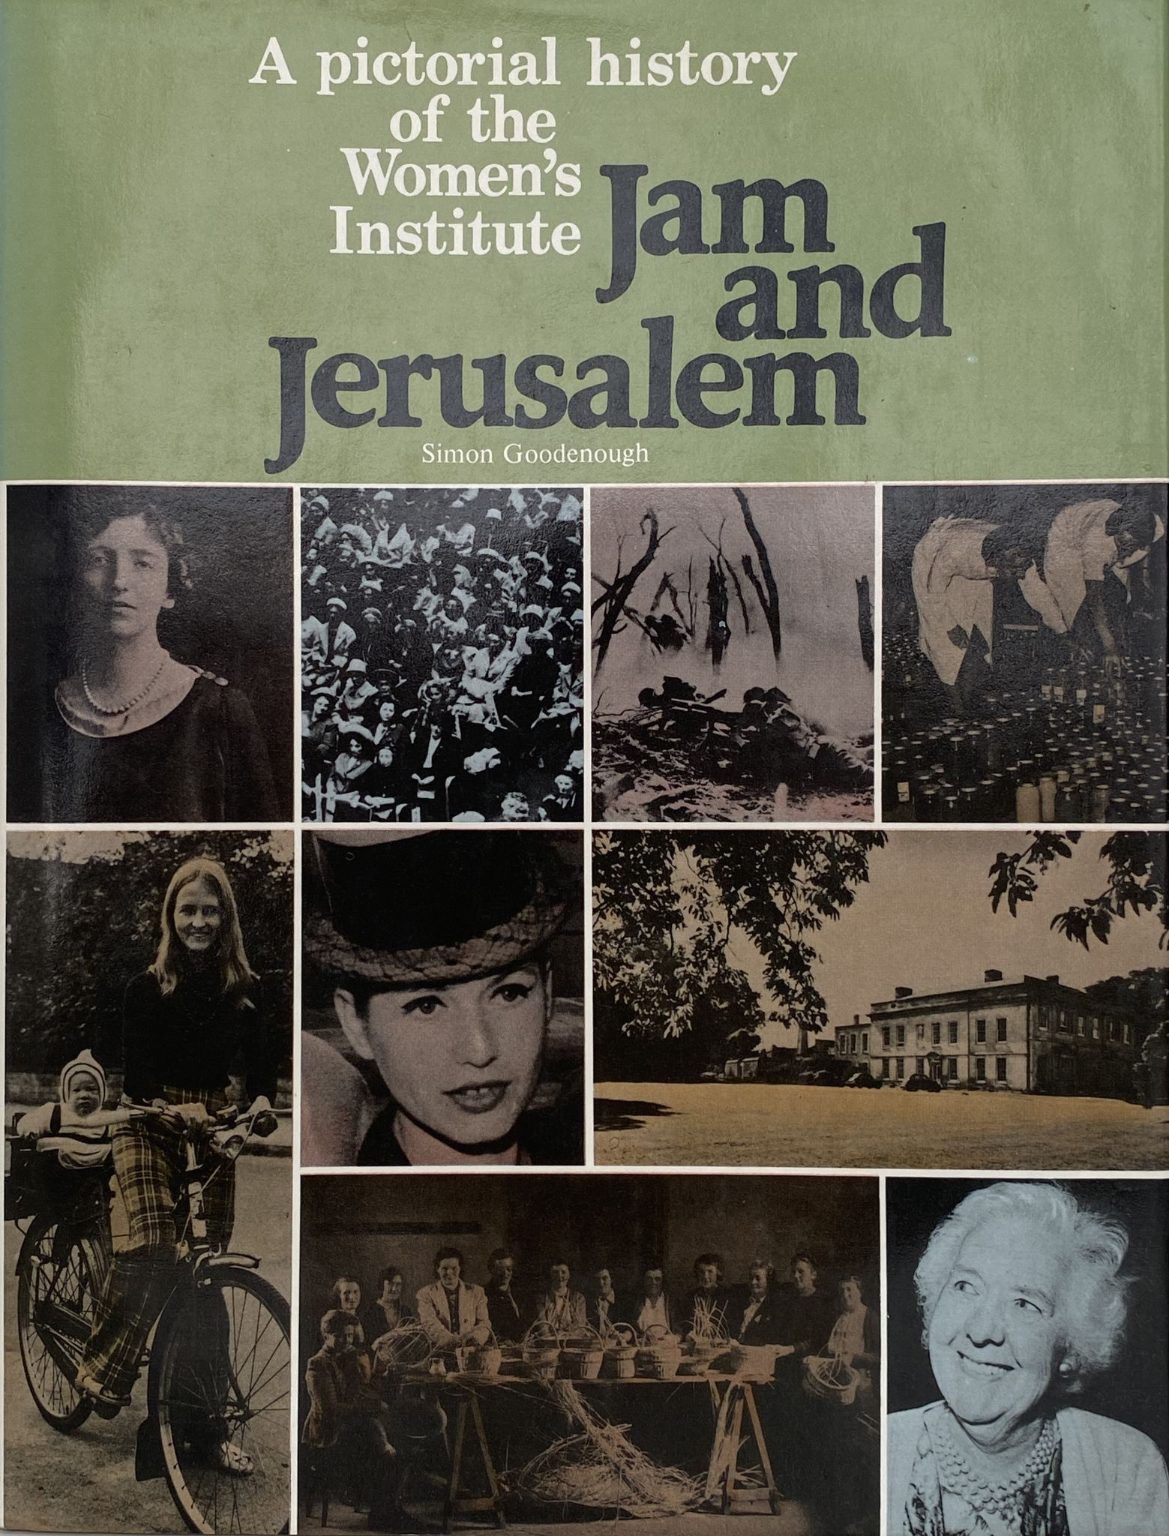 JAM AND JERUSALEM: A pictorial history of the Women's institute